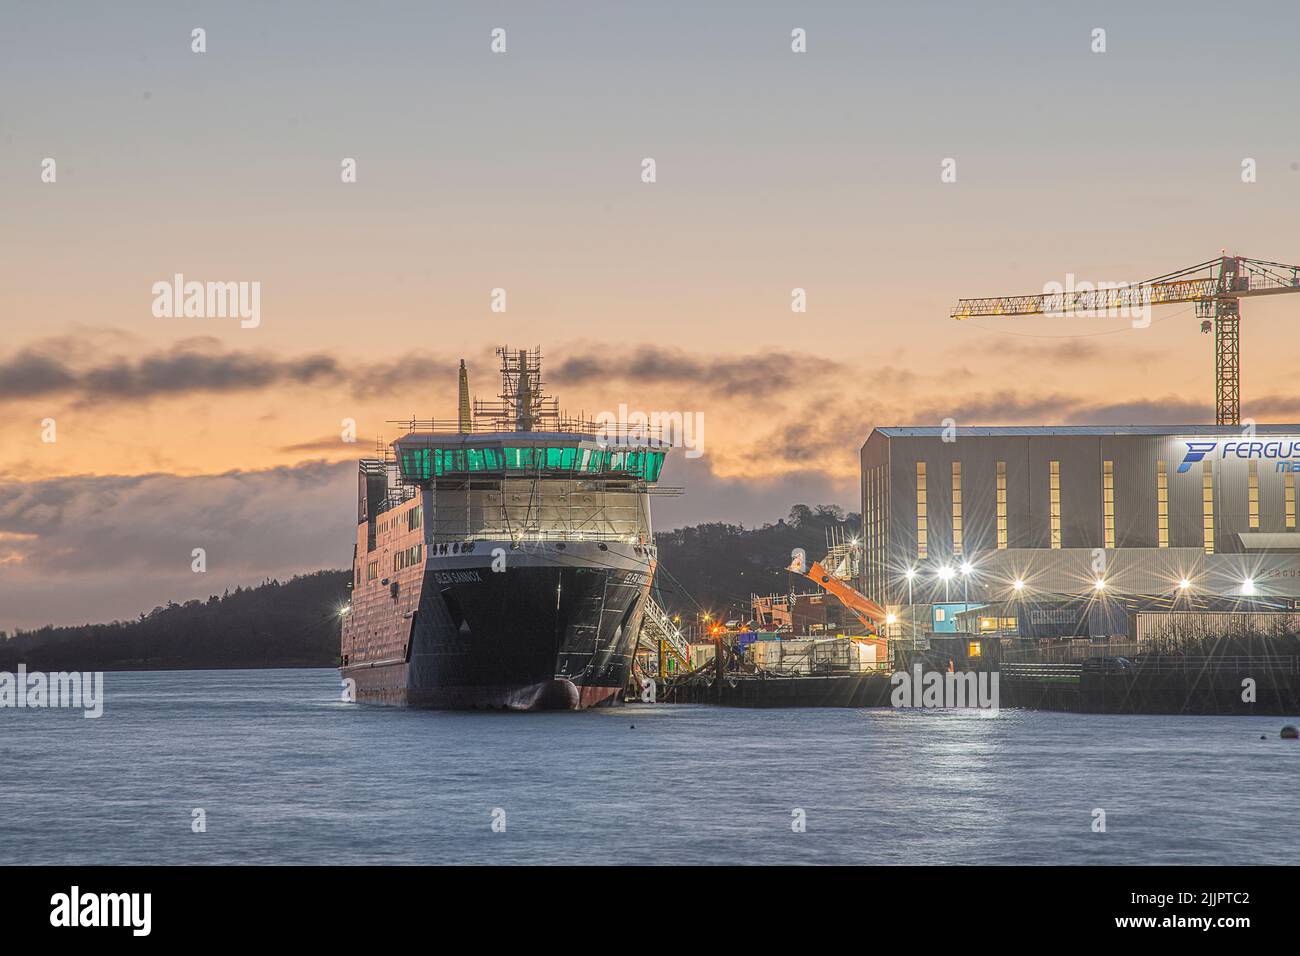 A closeup of a ferry in the Port Glasgow, Inverclyde, Scotland, United Kingdom at twilight Stock Photo